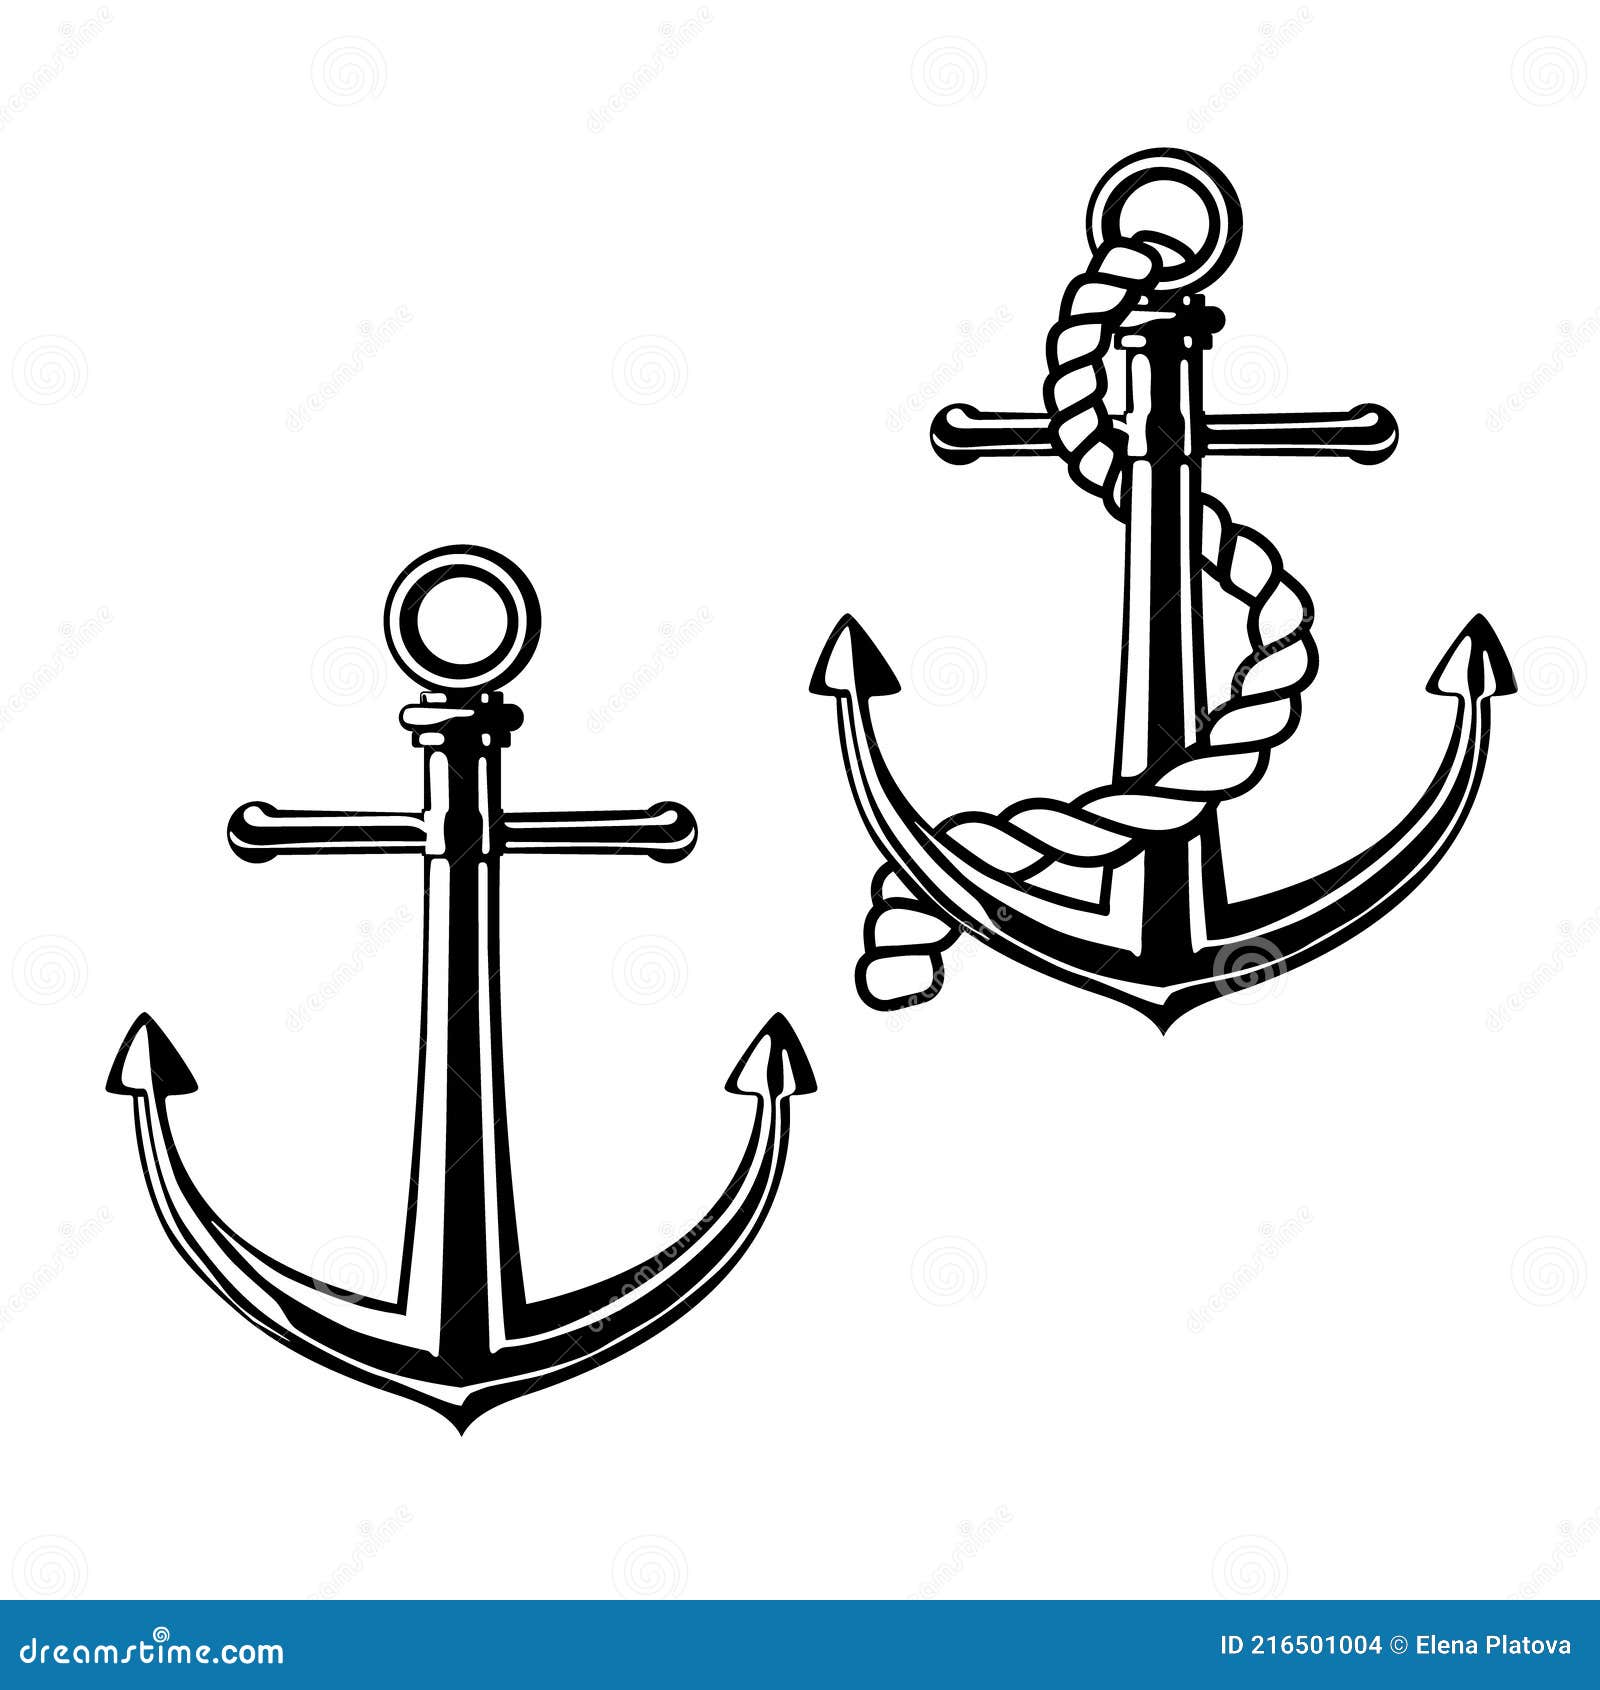 https://thumbs.dreamstime.com/z/anchor-rope-anchor-rope-silhouette-black-vector-illustration-outline-style-216501004.jpg